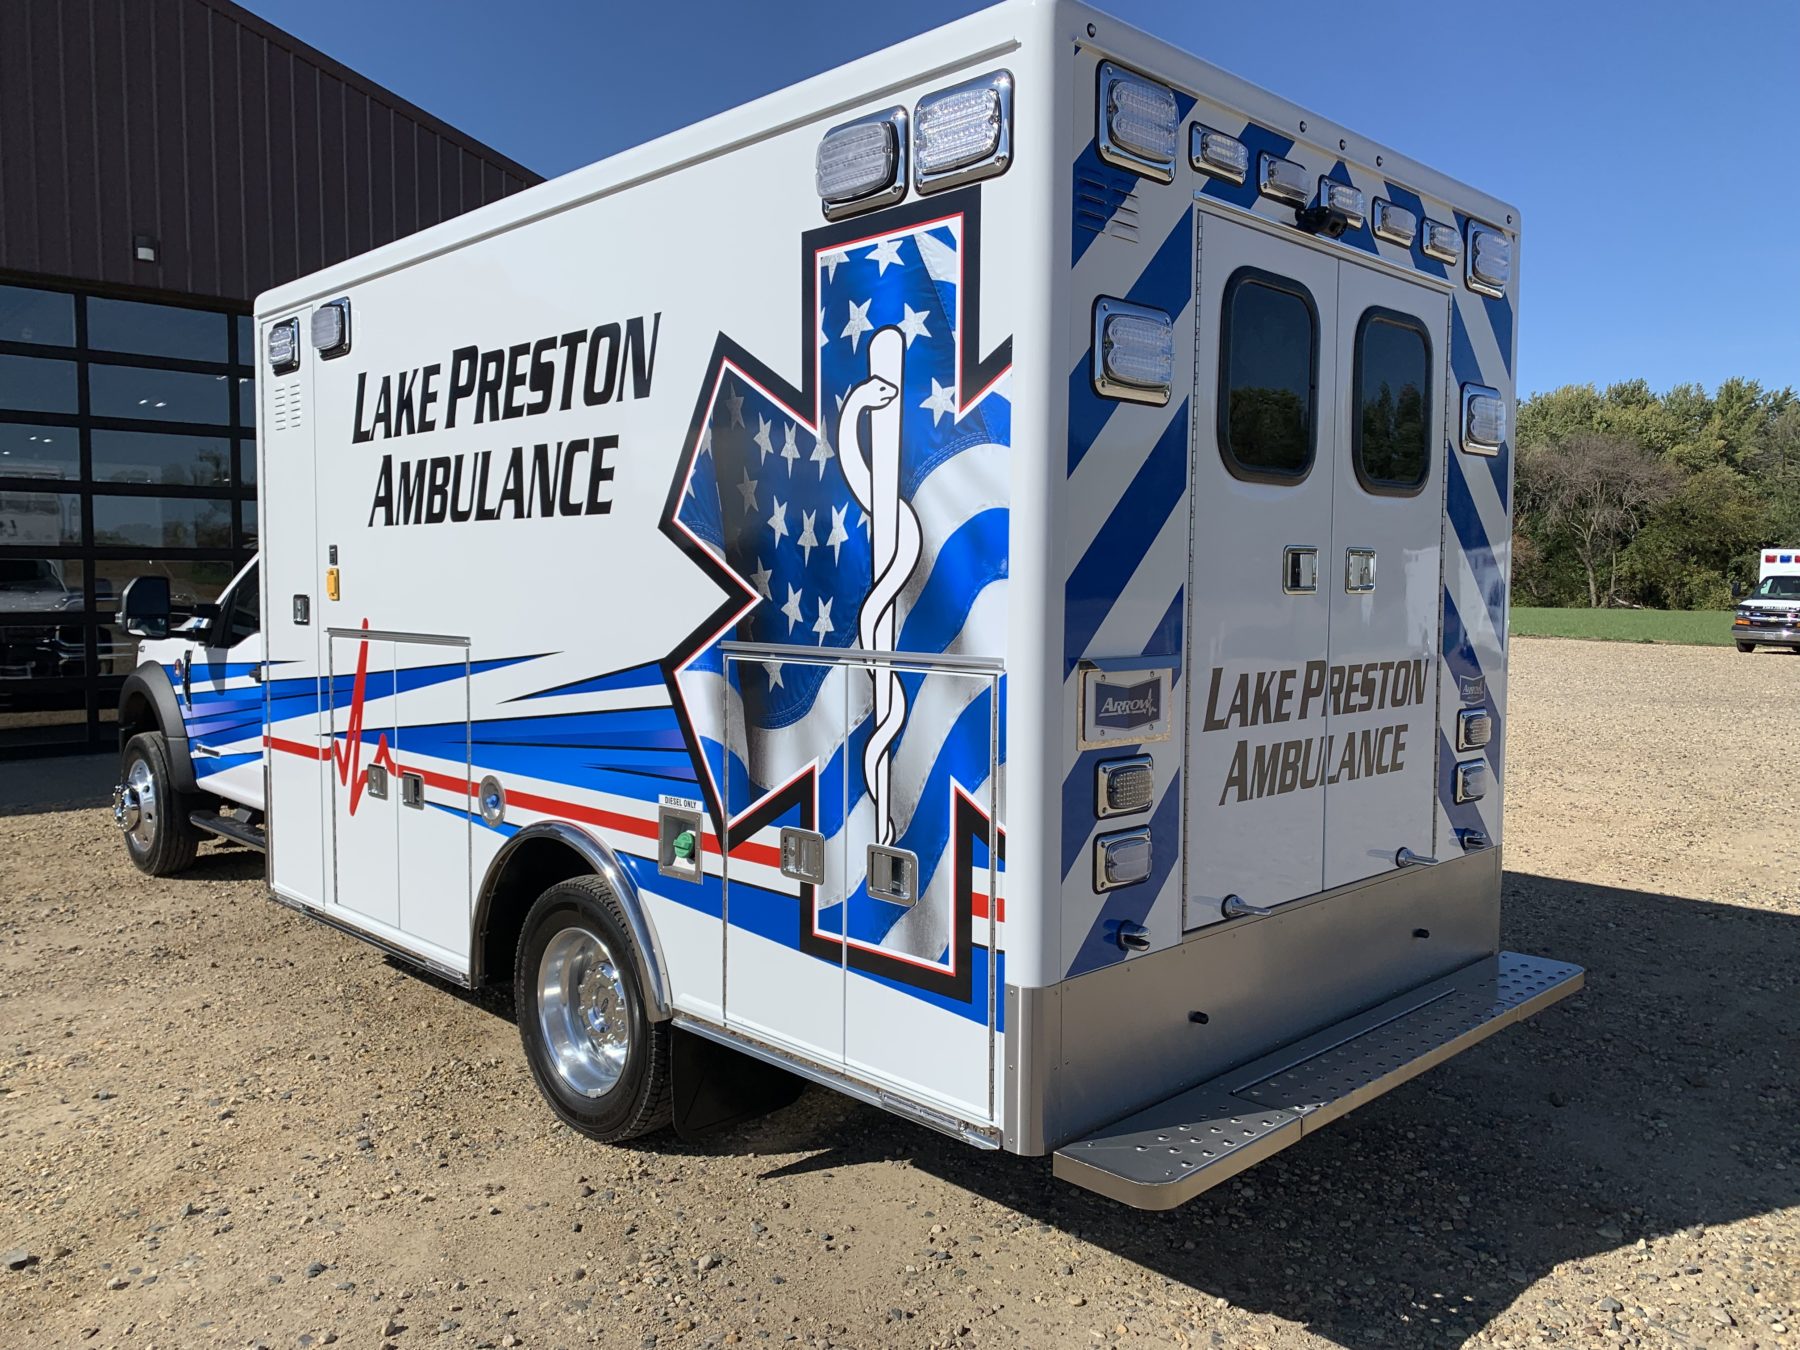 2021 Ford F550 4x4 Heavy Duty Ambulance For Sale – Picture 4